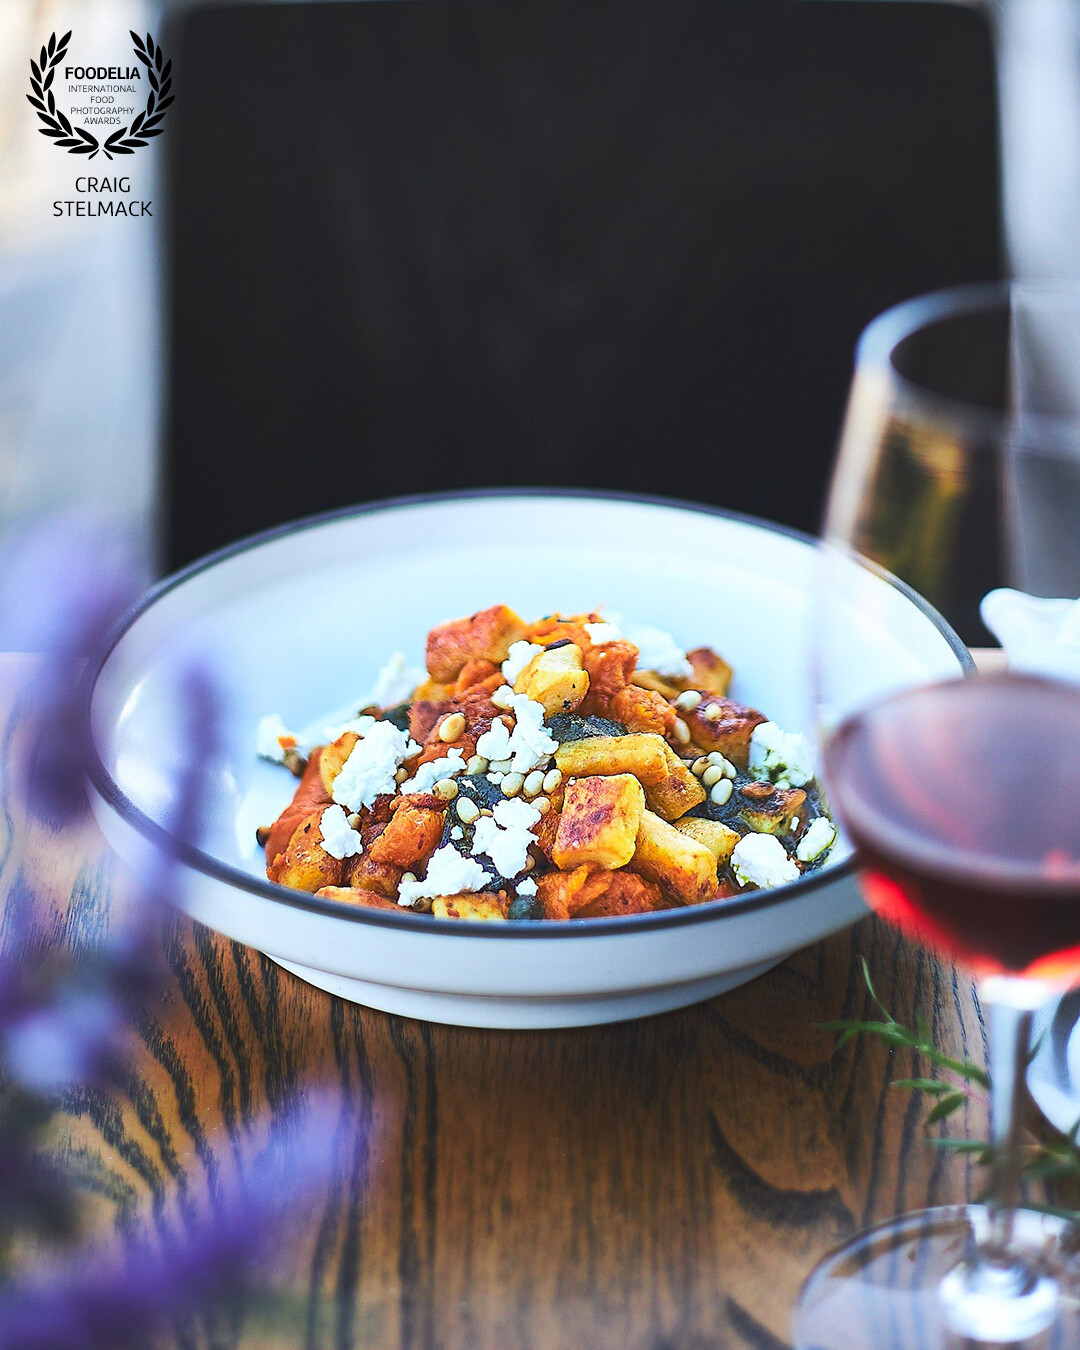 A winter menu shoot for a local winery client.  Shot in natural light on the winery patio.